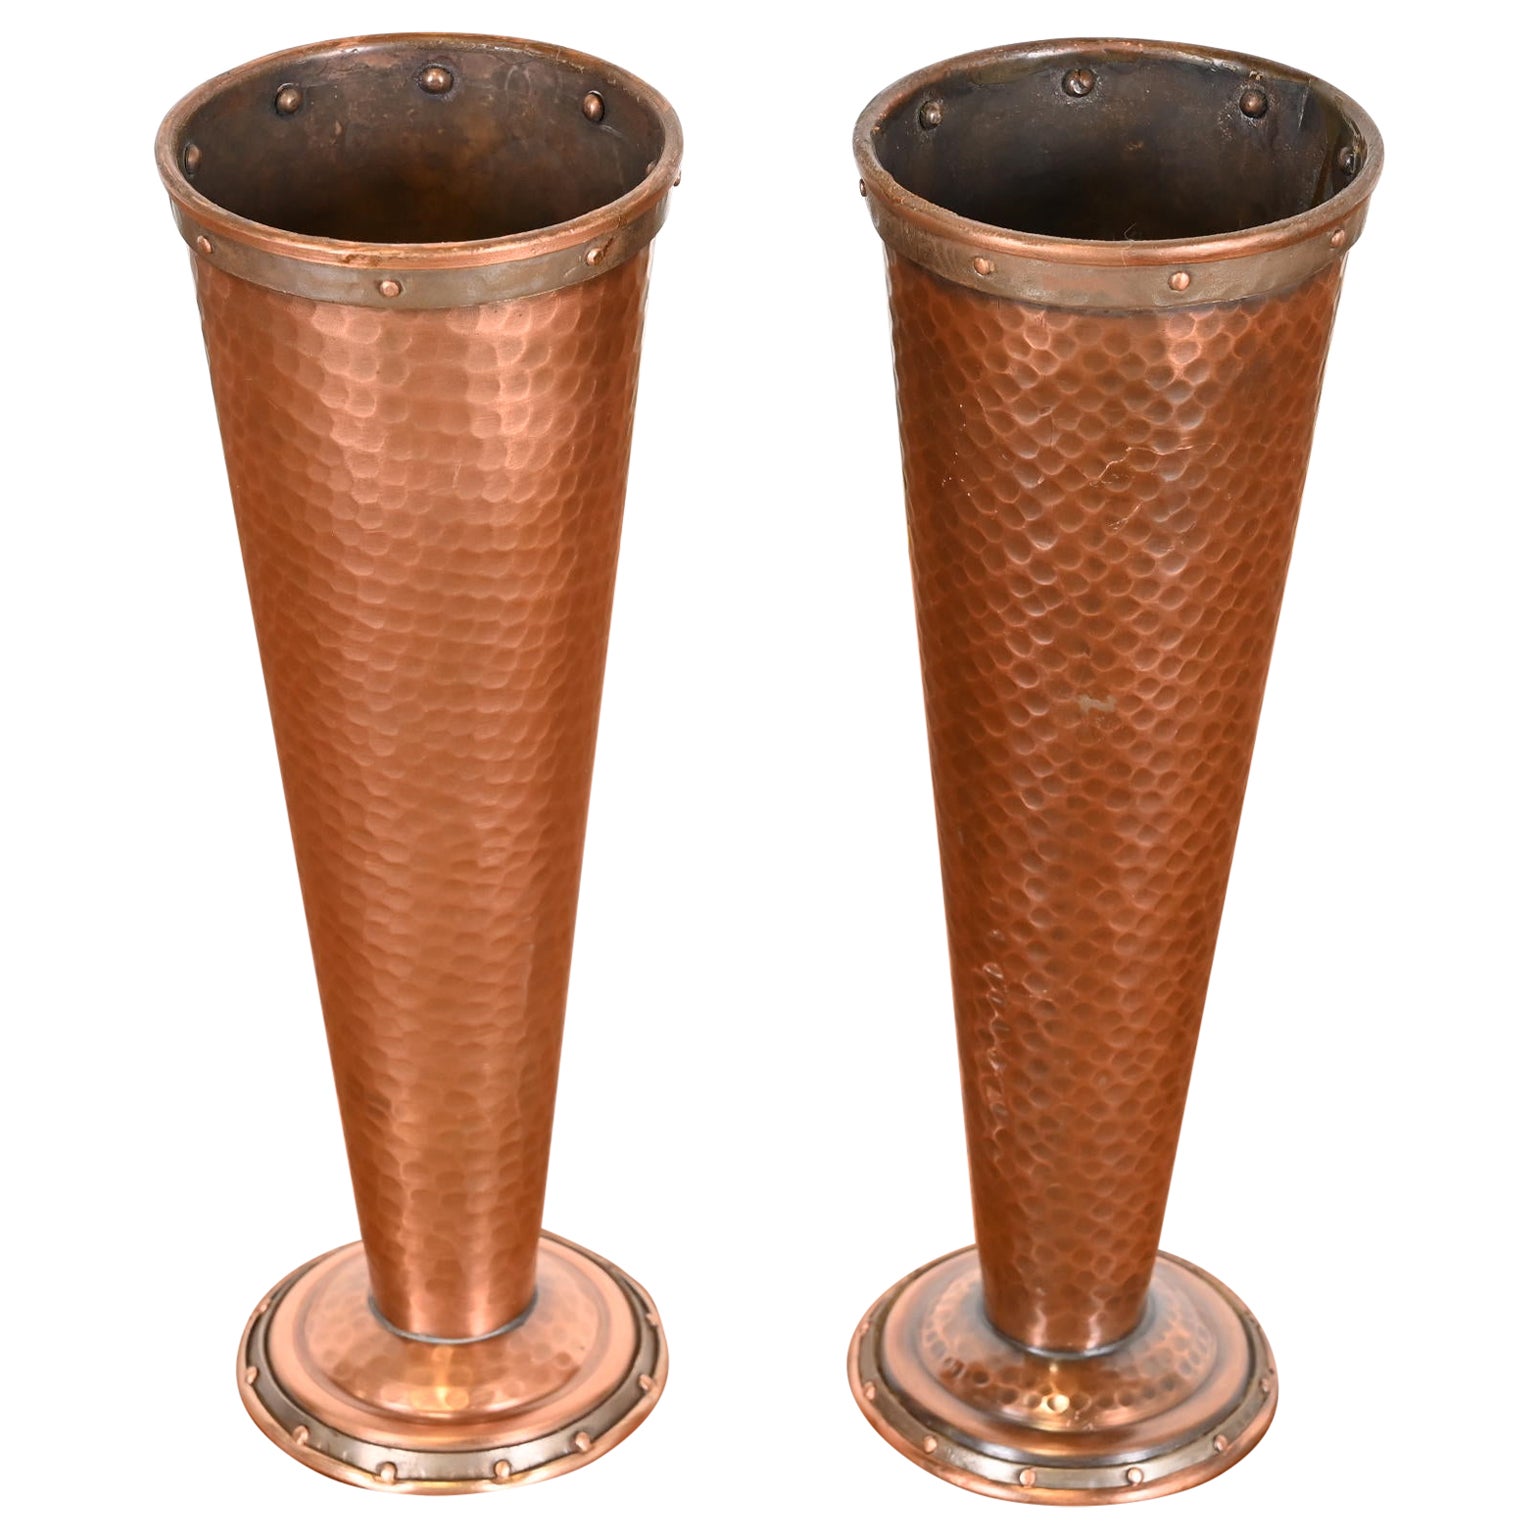 Joseph Heinrichs Style Arts and Crafts Hand-Hammered Copper Vases, Pair